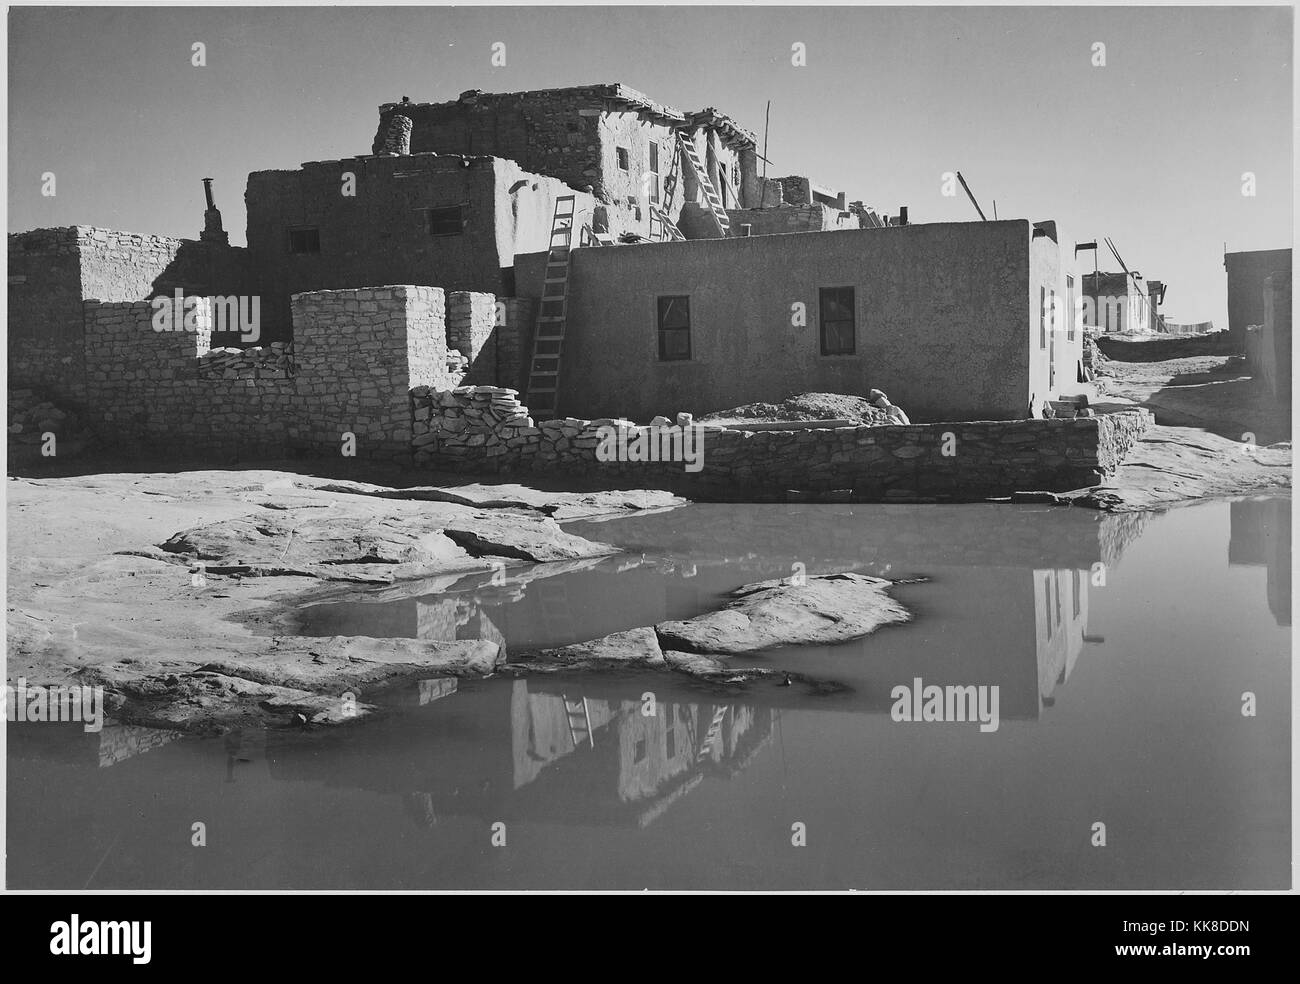 Black and white photograph, full side view of adobe house with water in foreground, captioned 'Acoma Pueblo National Historic Landmark, New Mexico', by Ansel Adams, from Photographs of National Parks and Monuments, New Mexico, United States, 1941. Stock Photo